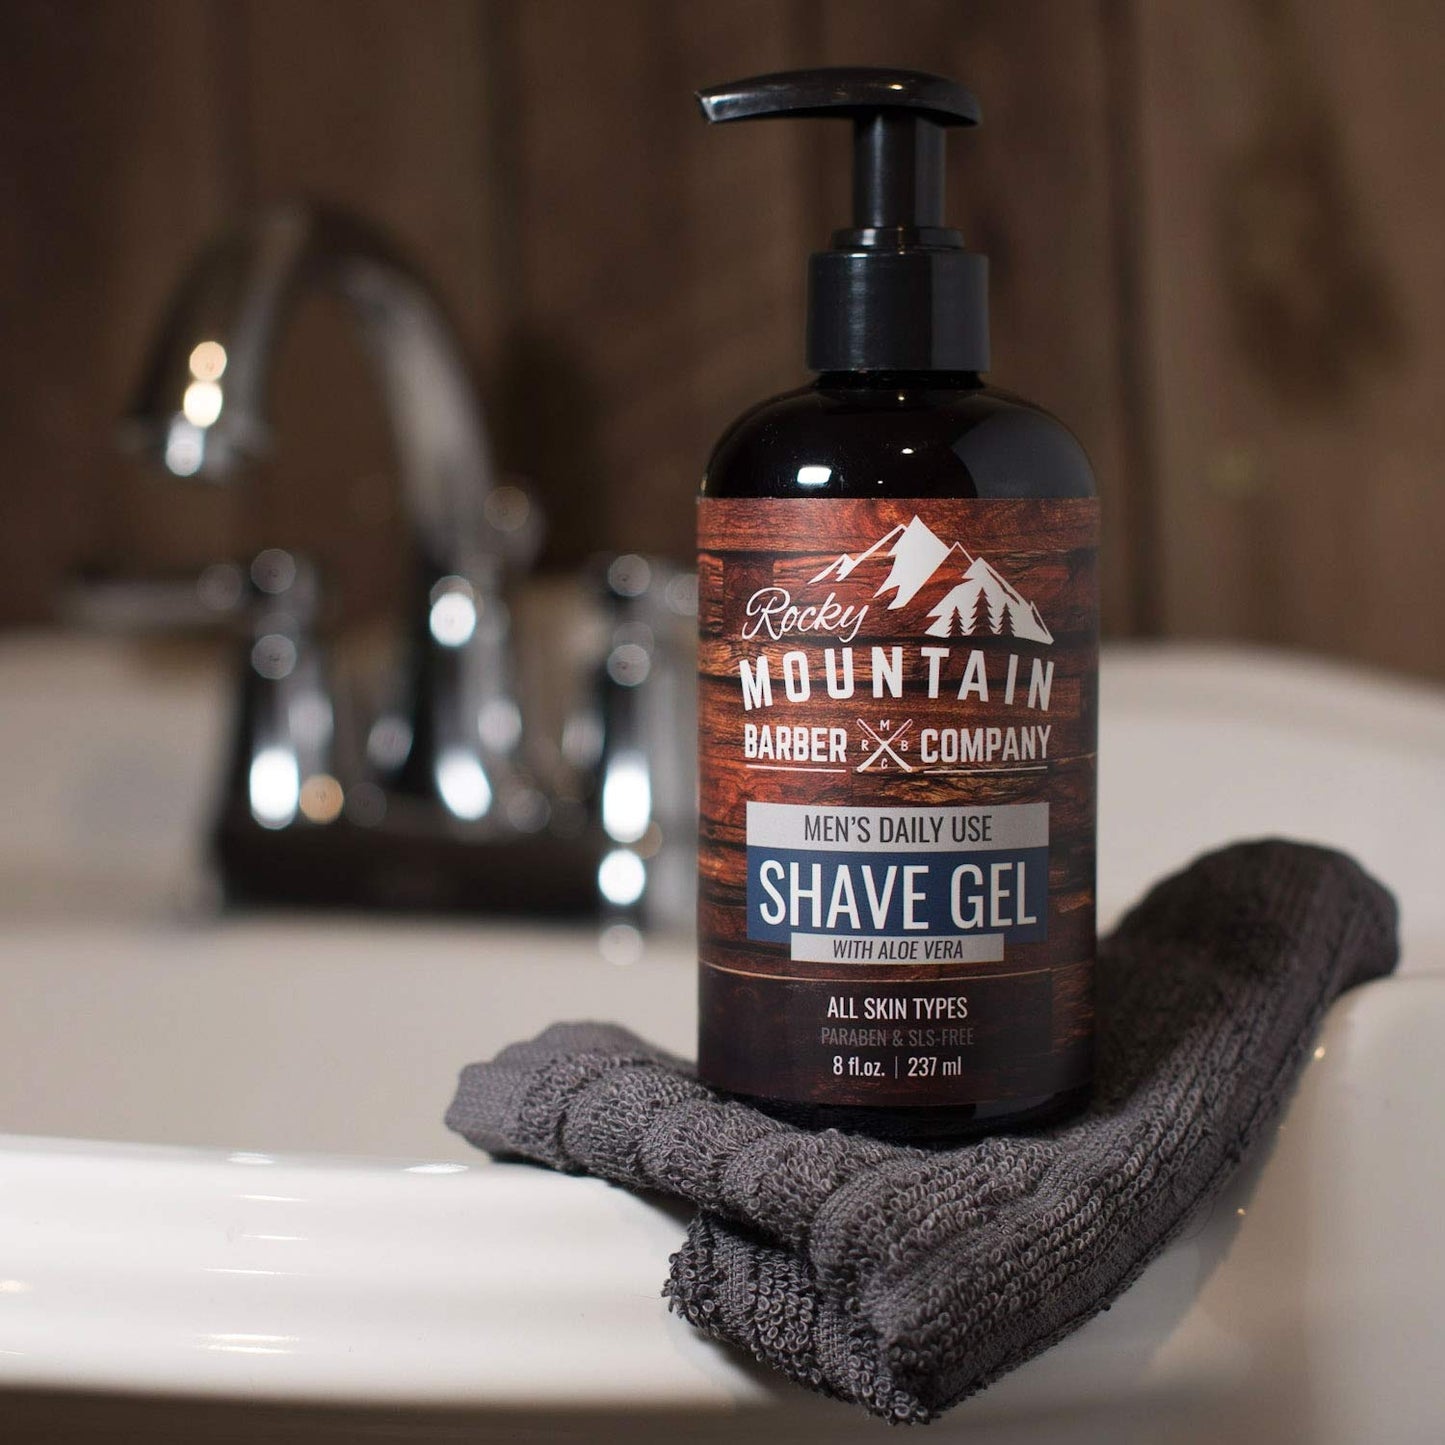 Men's Shave Gel - Clear Shaving Gel So You Can See Where You Are Shaving – For Full Shaves and Tightening Beard Lines - 8oz by Rocky Mountain Barber Company